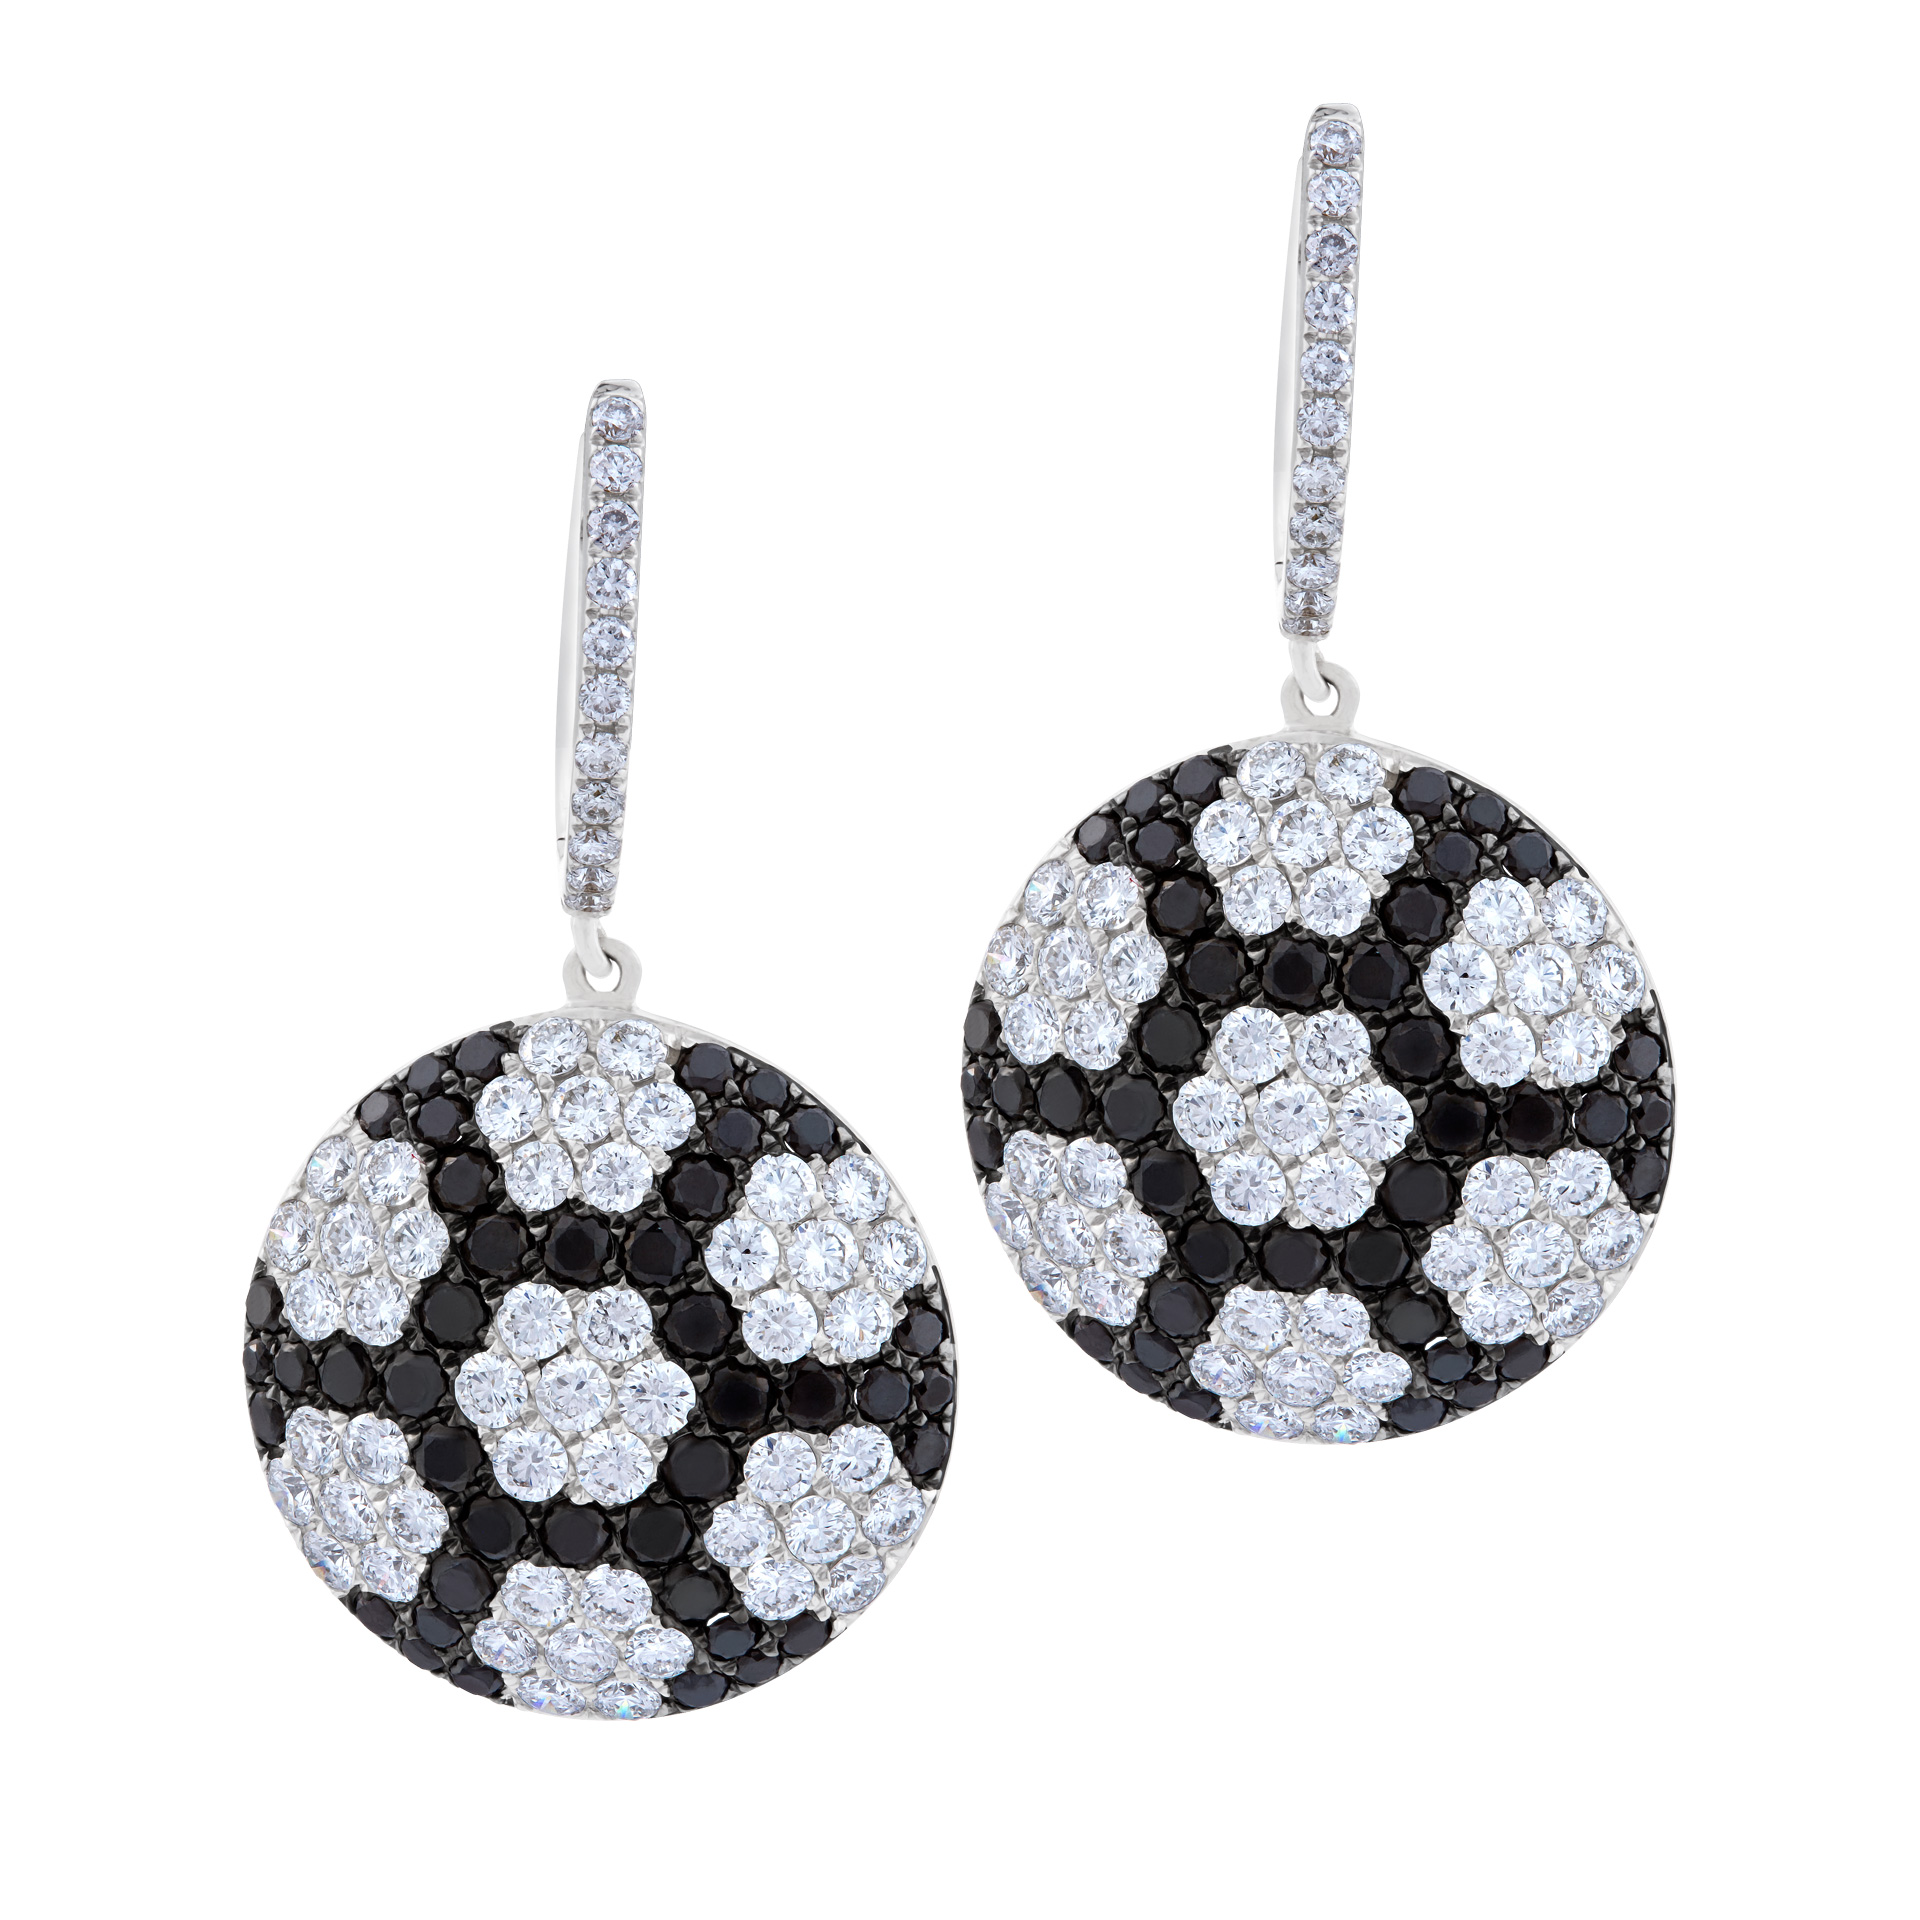 Flower disc black and white diamond earrings in 18k white gold. 6.00 carats image 1